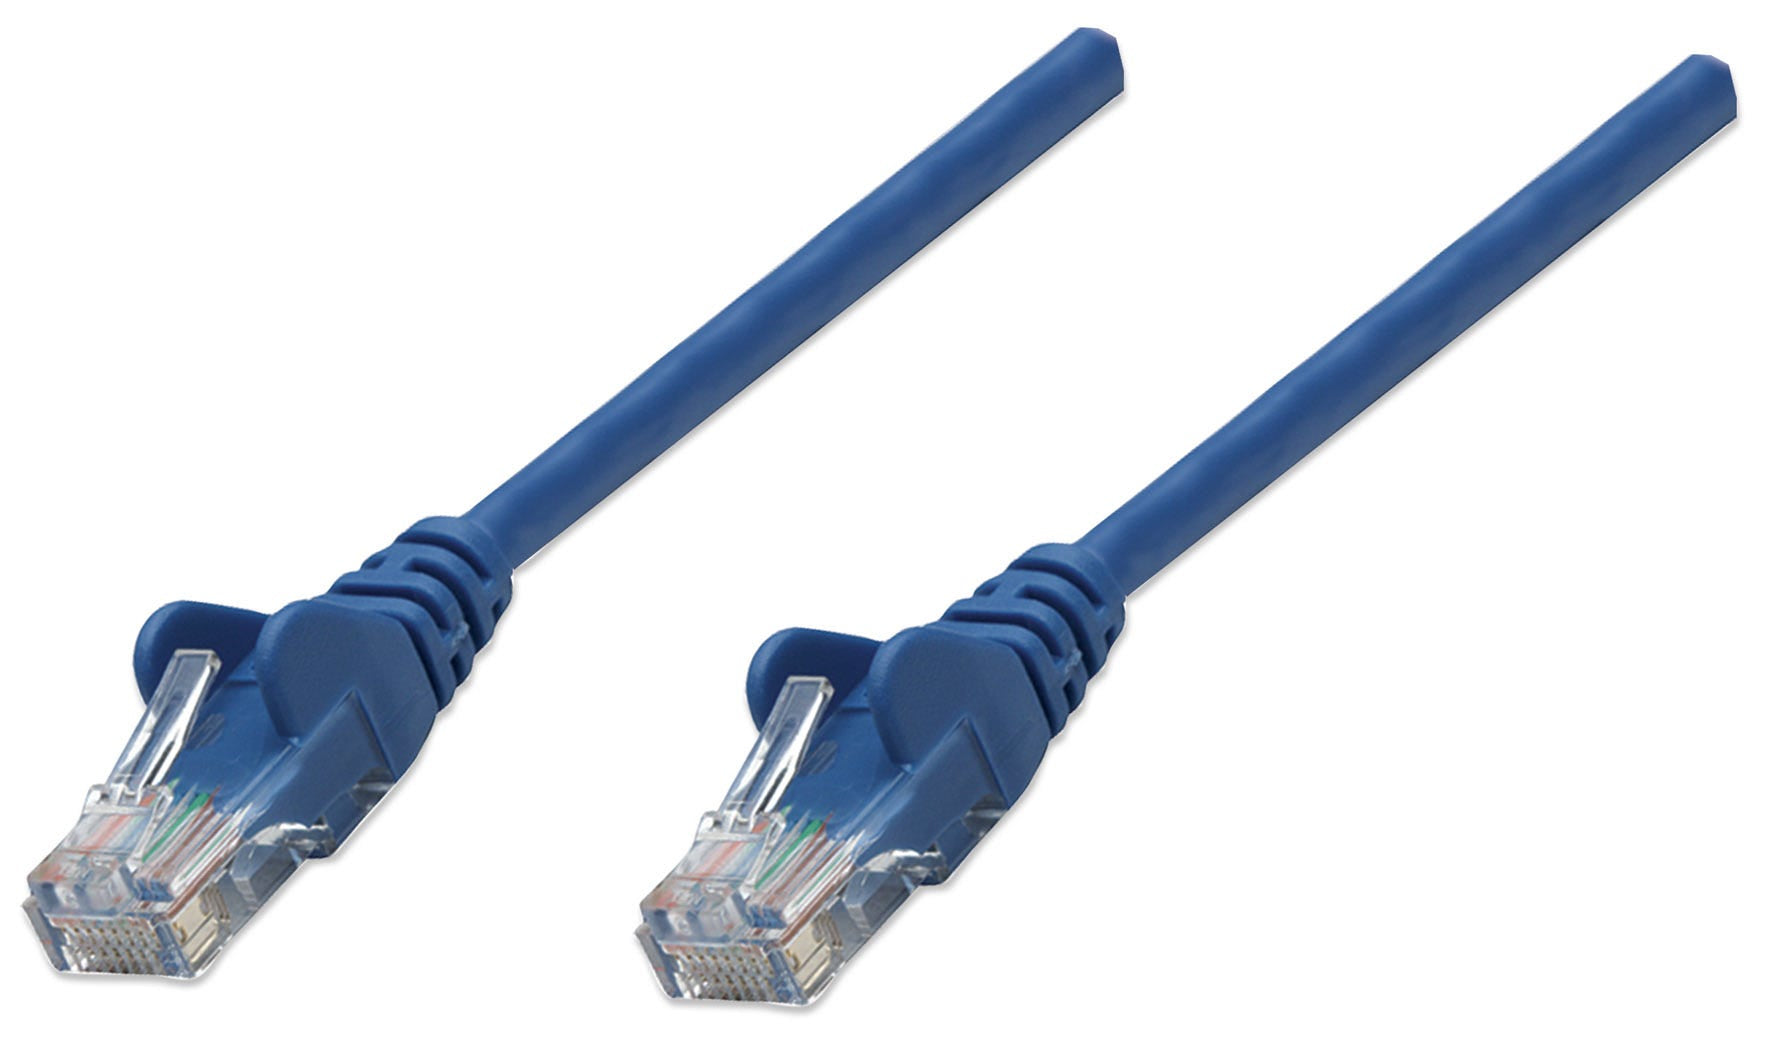 Intellinet Network Patch Cable, Cat6, 1.5m, Blue, CCA, U/UTP, PVC, RJ45, Gold Plated Contacts, Snagless, Booted, Lifetime Warranty, Polybag